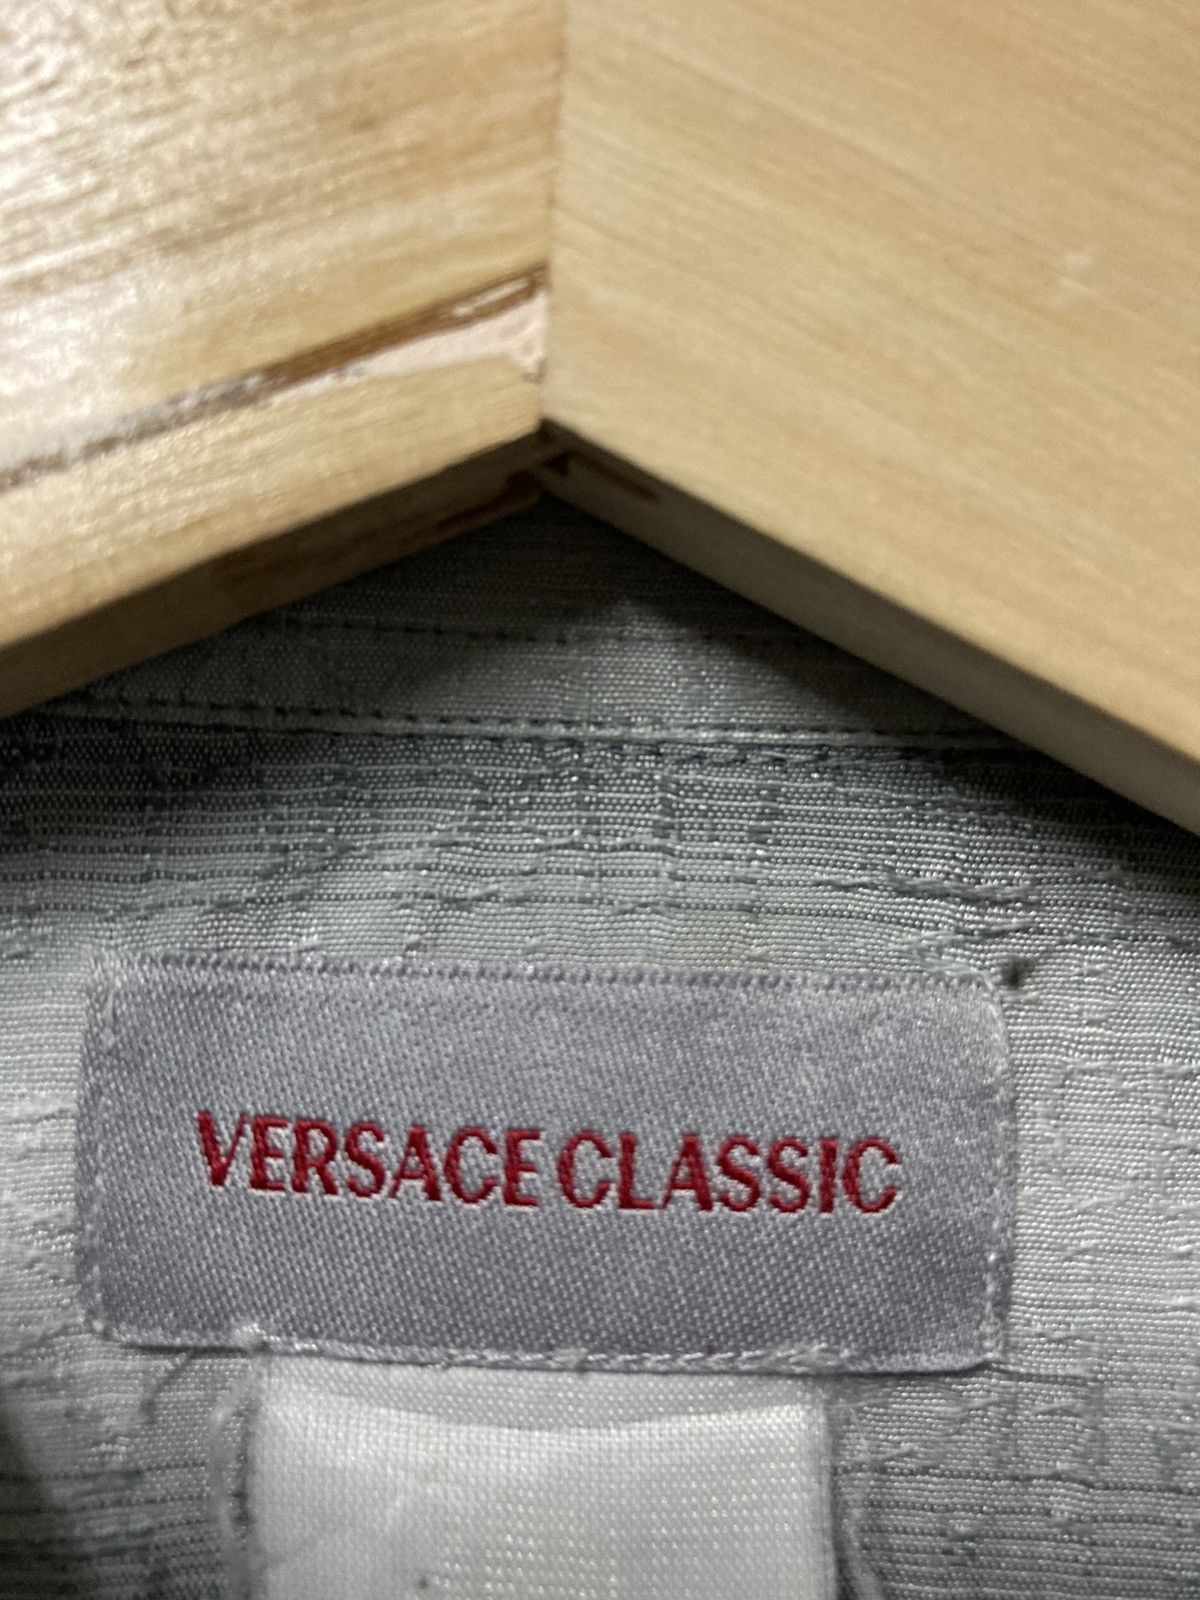 Vintage Versace Classic Long Sleeve Button Up Shirt - 9